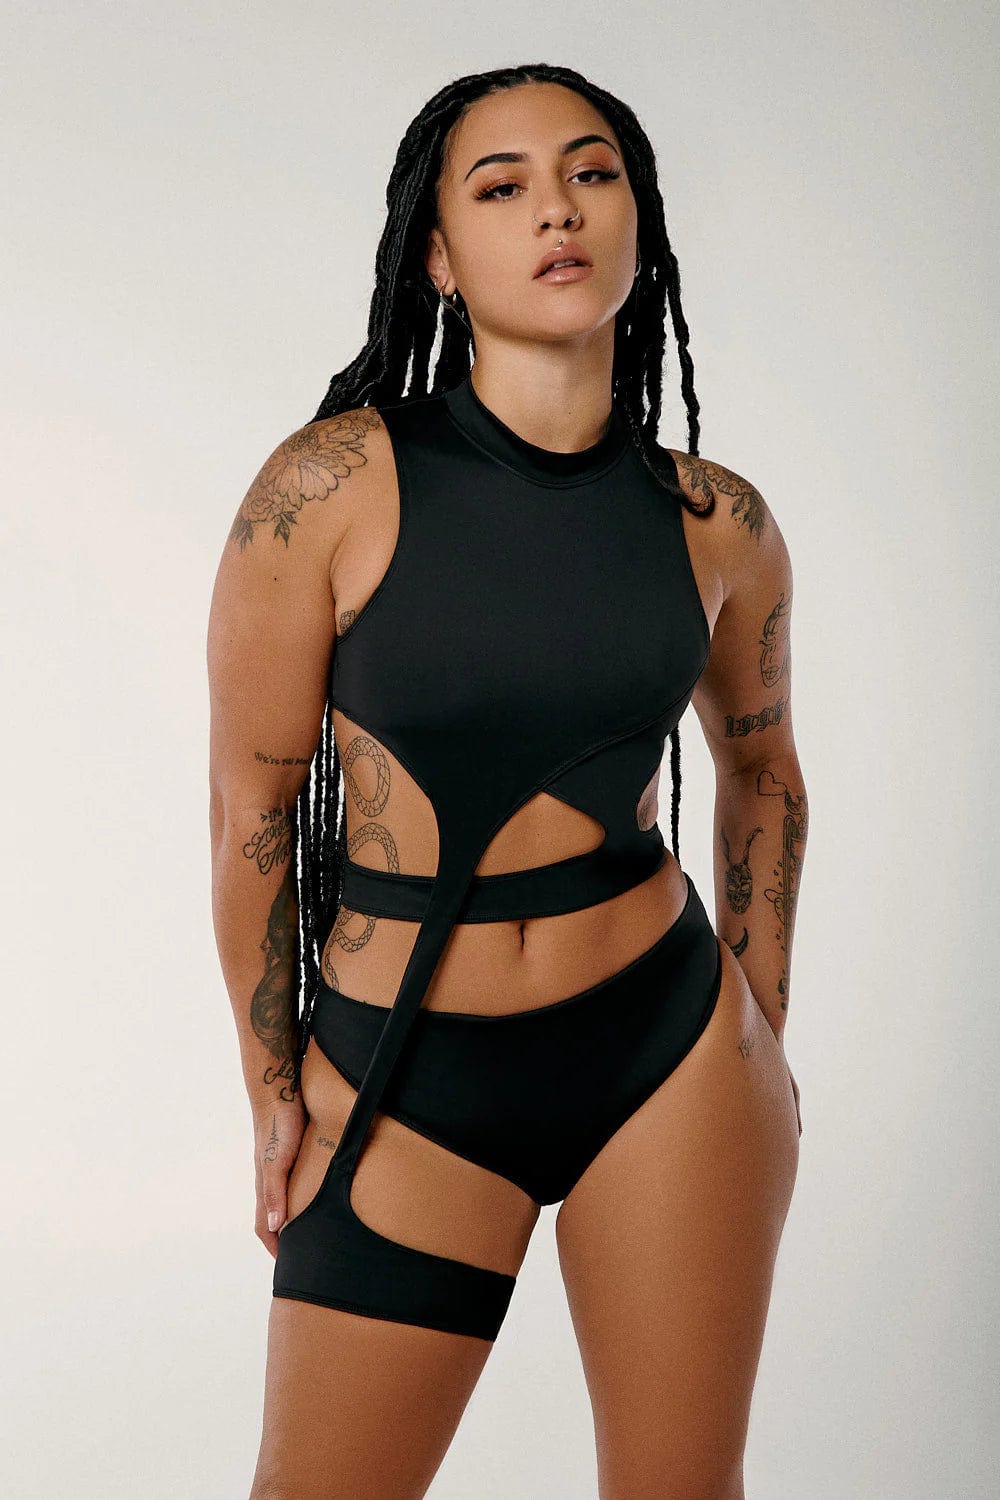 Super Sales! Wholesale 👏 All Pole Wear Lunalae Sticky Grip Bodysuit -  Recycled Black 🌟, Free Shipping